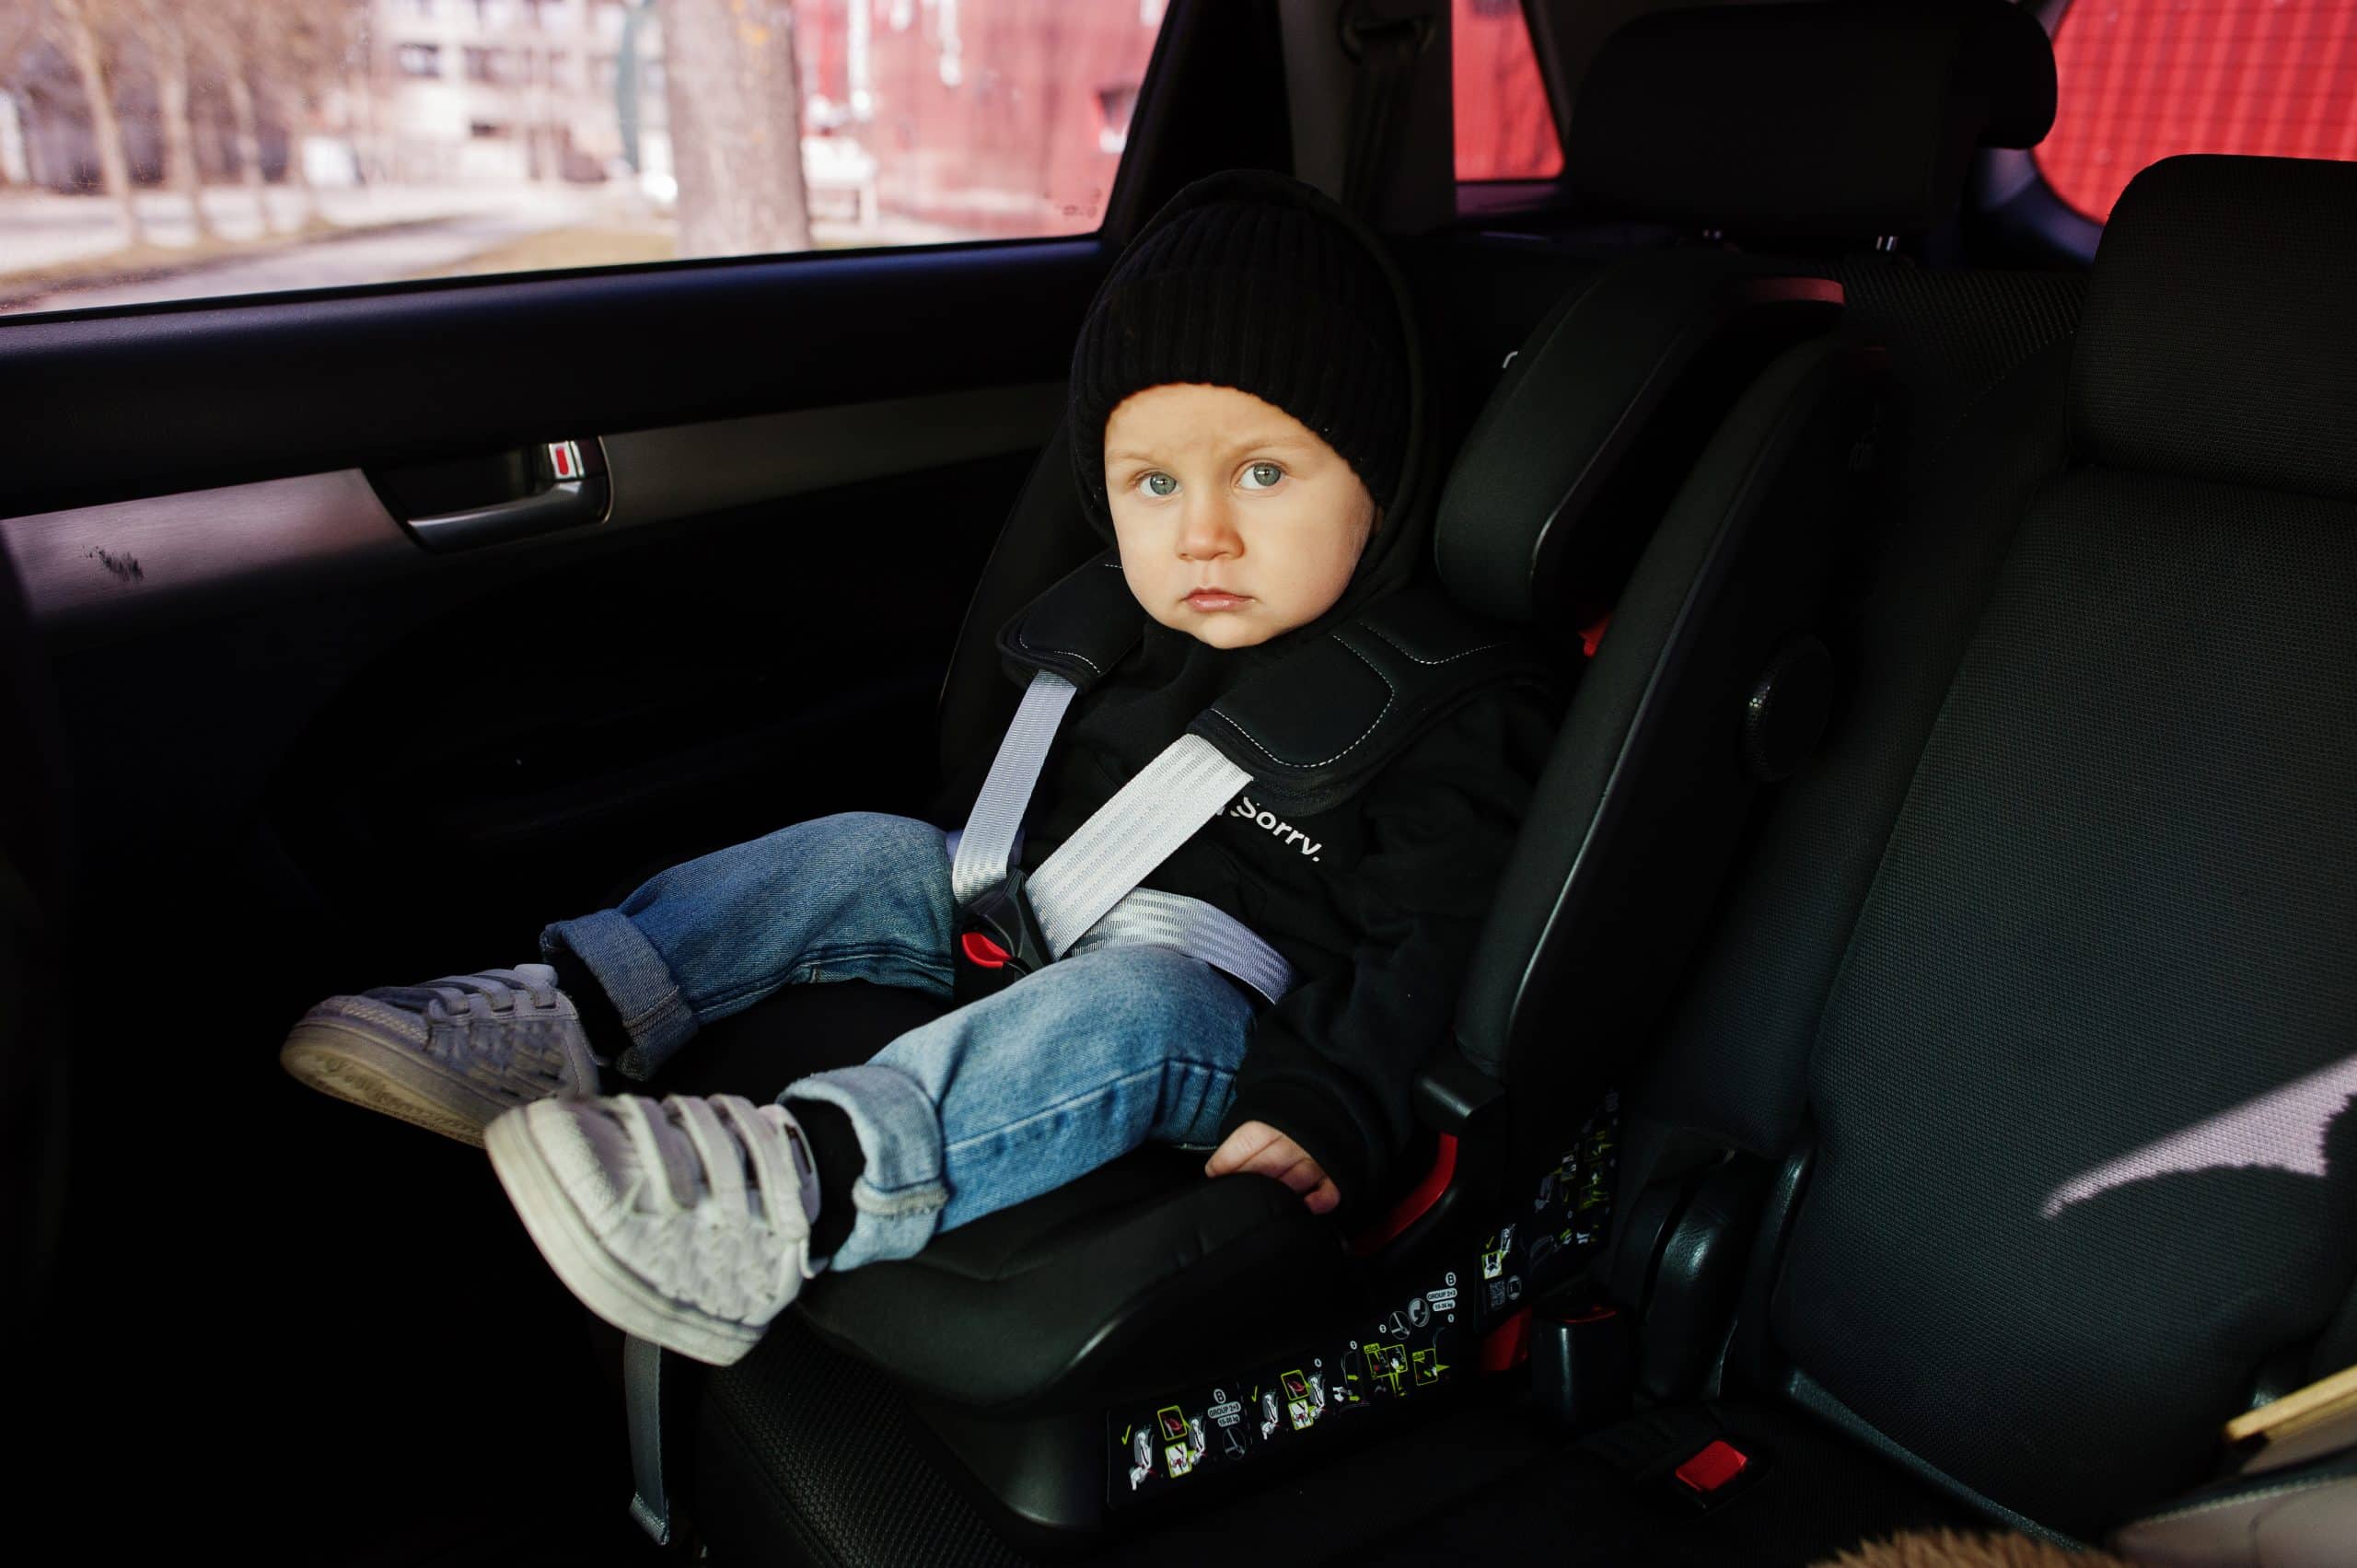 Installing and Using Child Safety Seats Correctly